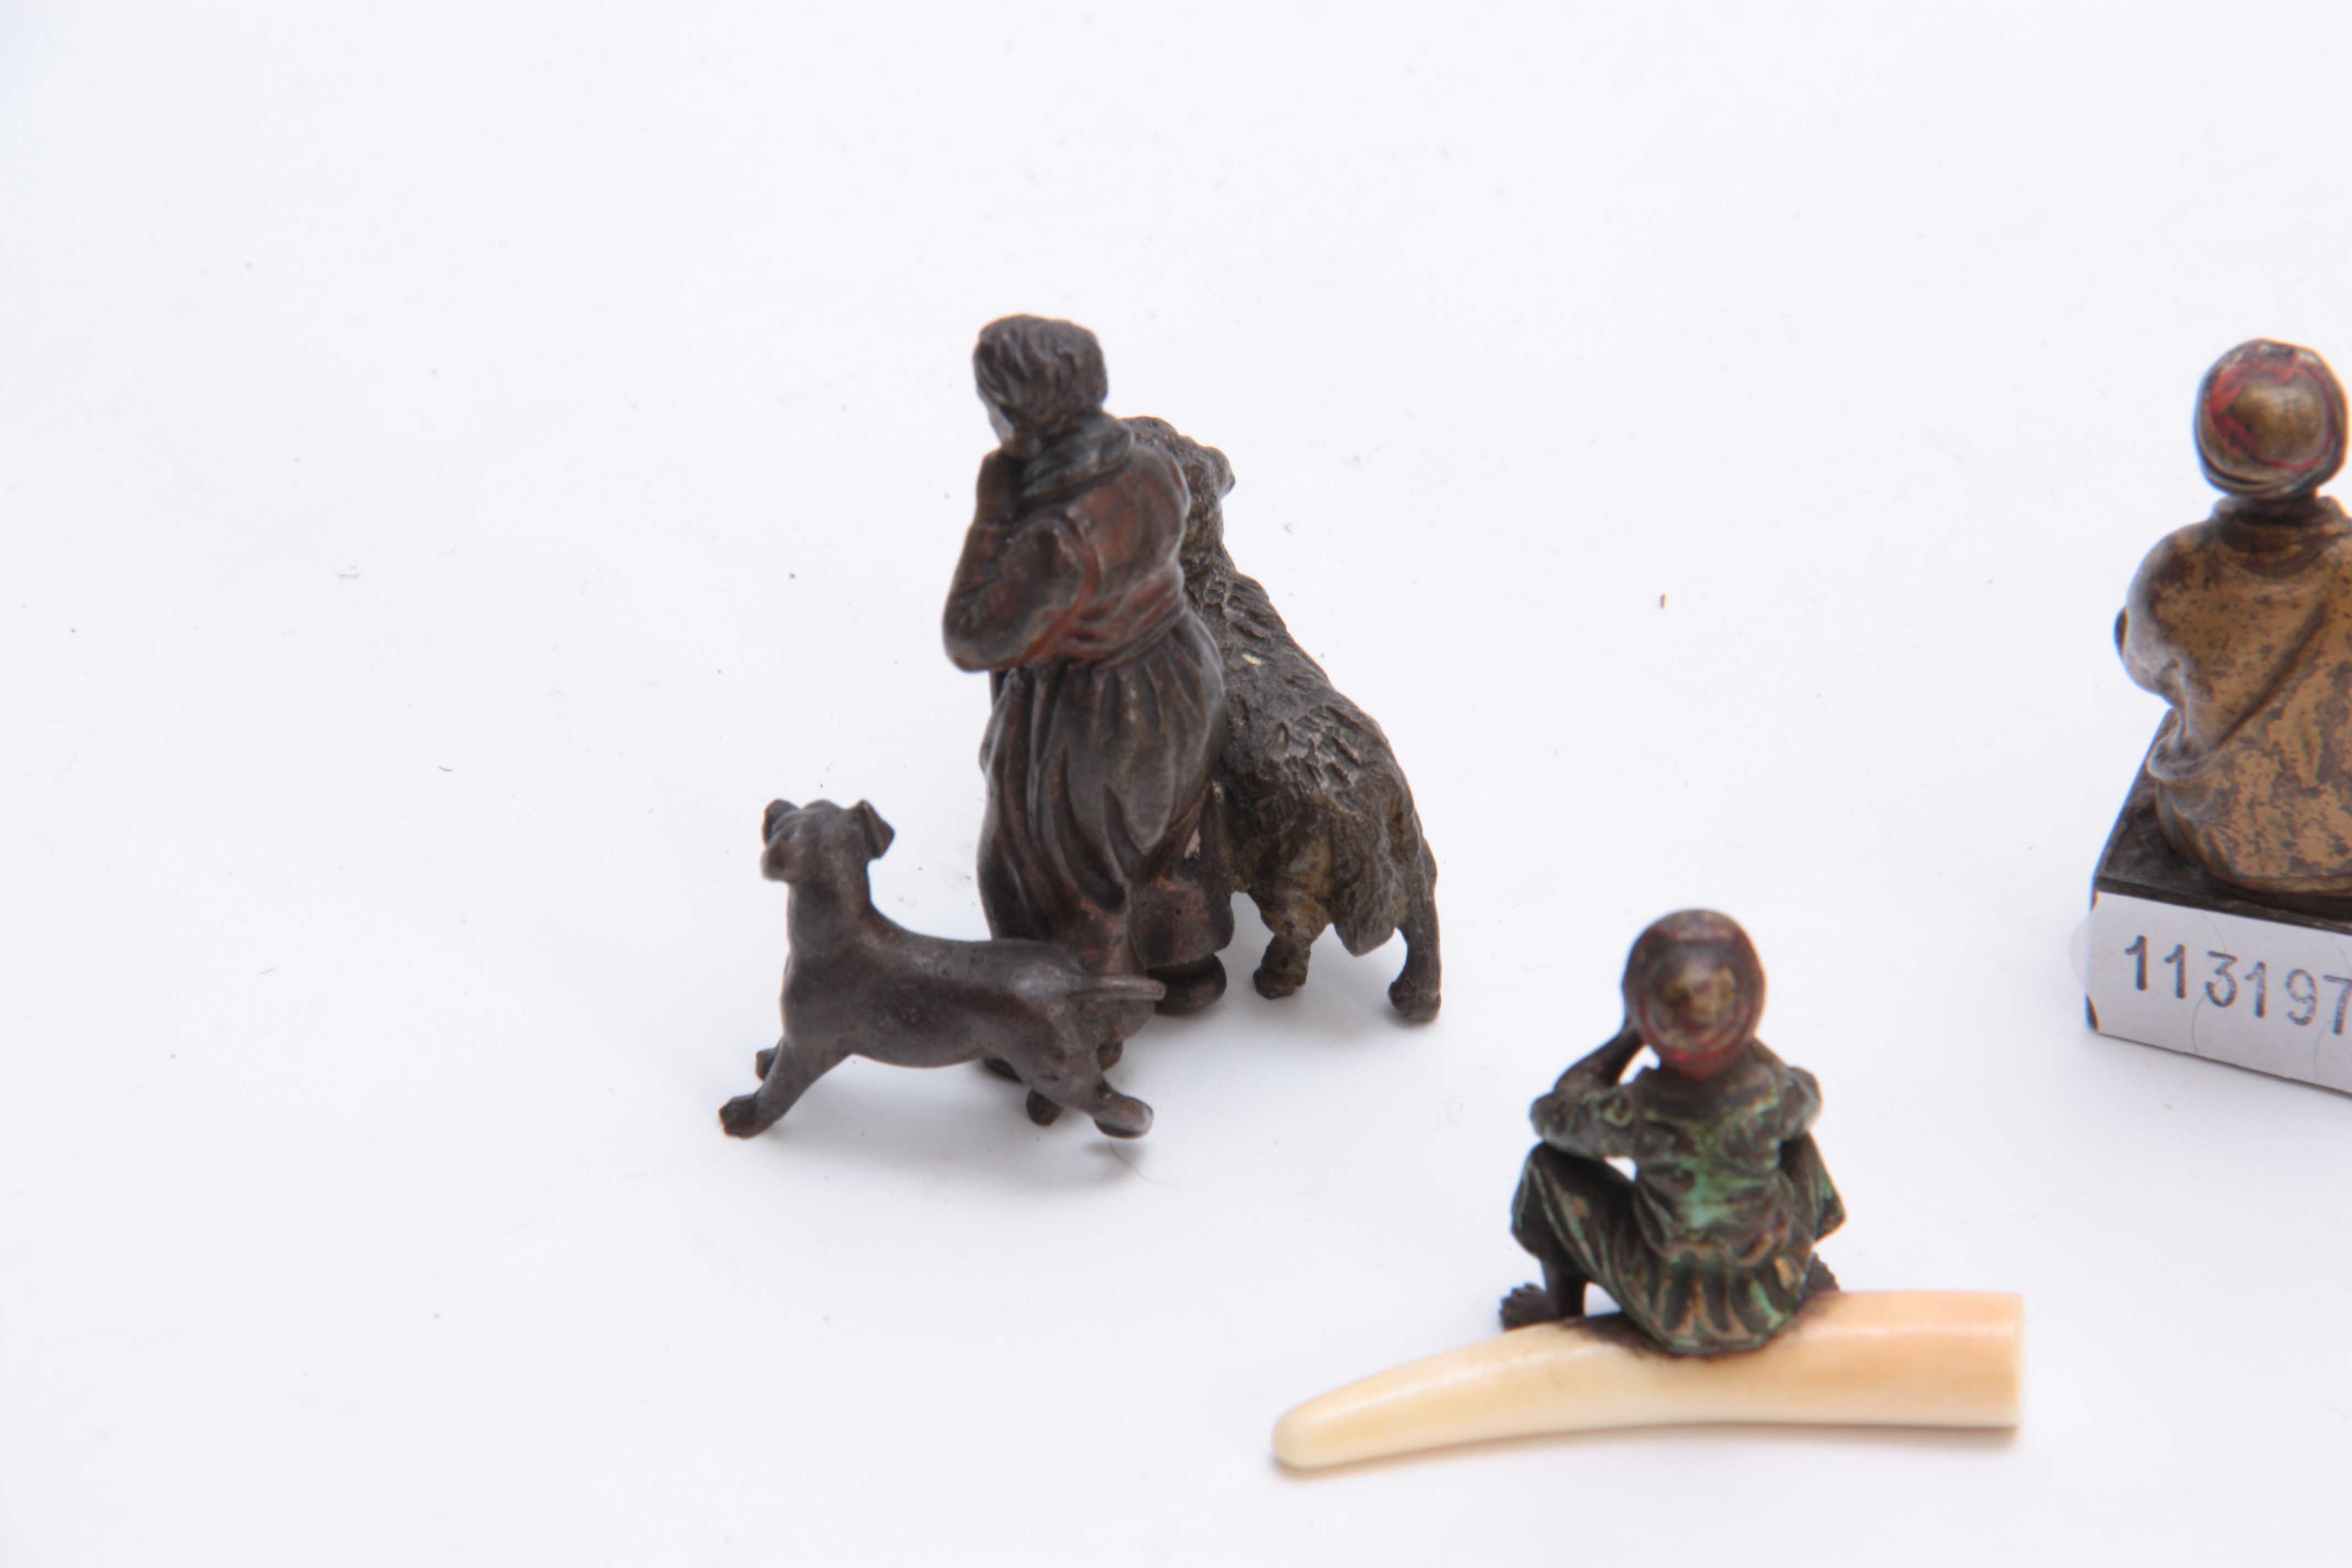 A COLLECTION OF THREE EARLY 20th CENTURY COLD PAINTED BRONZE FIGURES modelled as an Arab bookseller, - Image 5 of 5